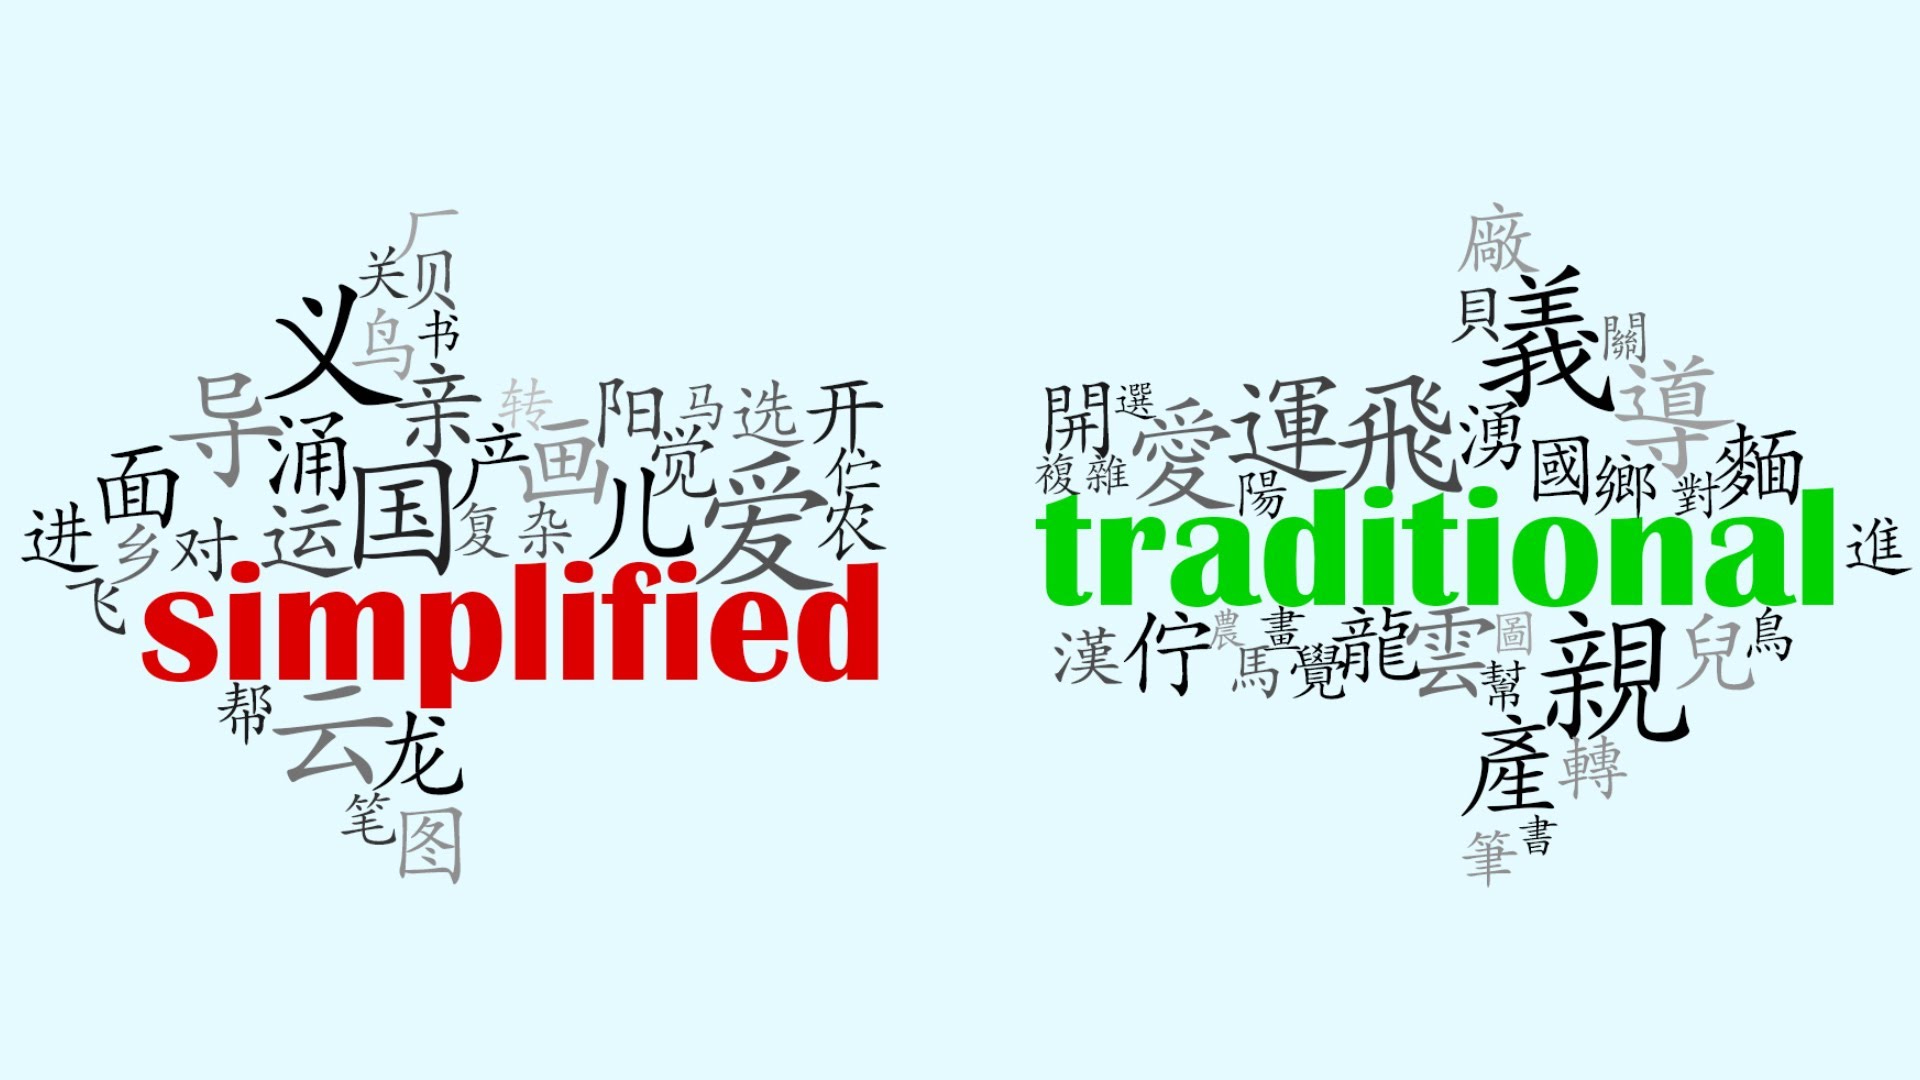 Is it worth studying traditional characters?